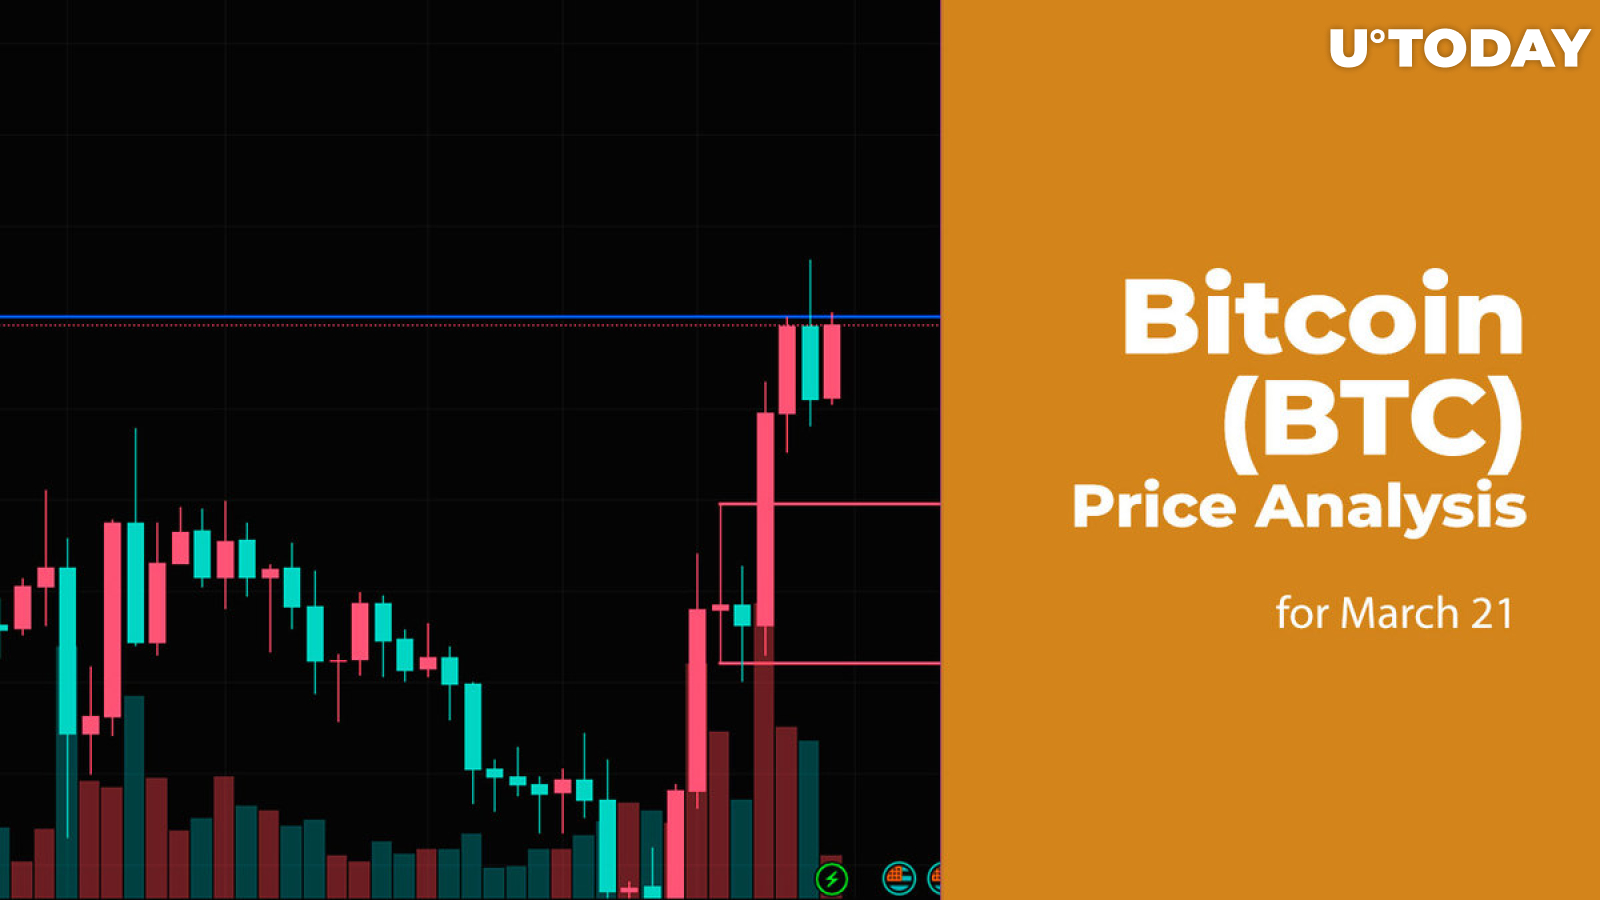 Bitcoin (BTC) Price Analysis for March 21